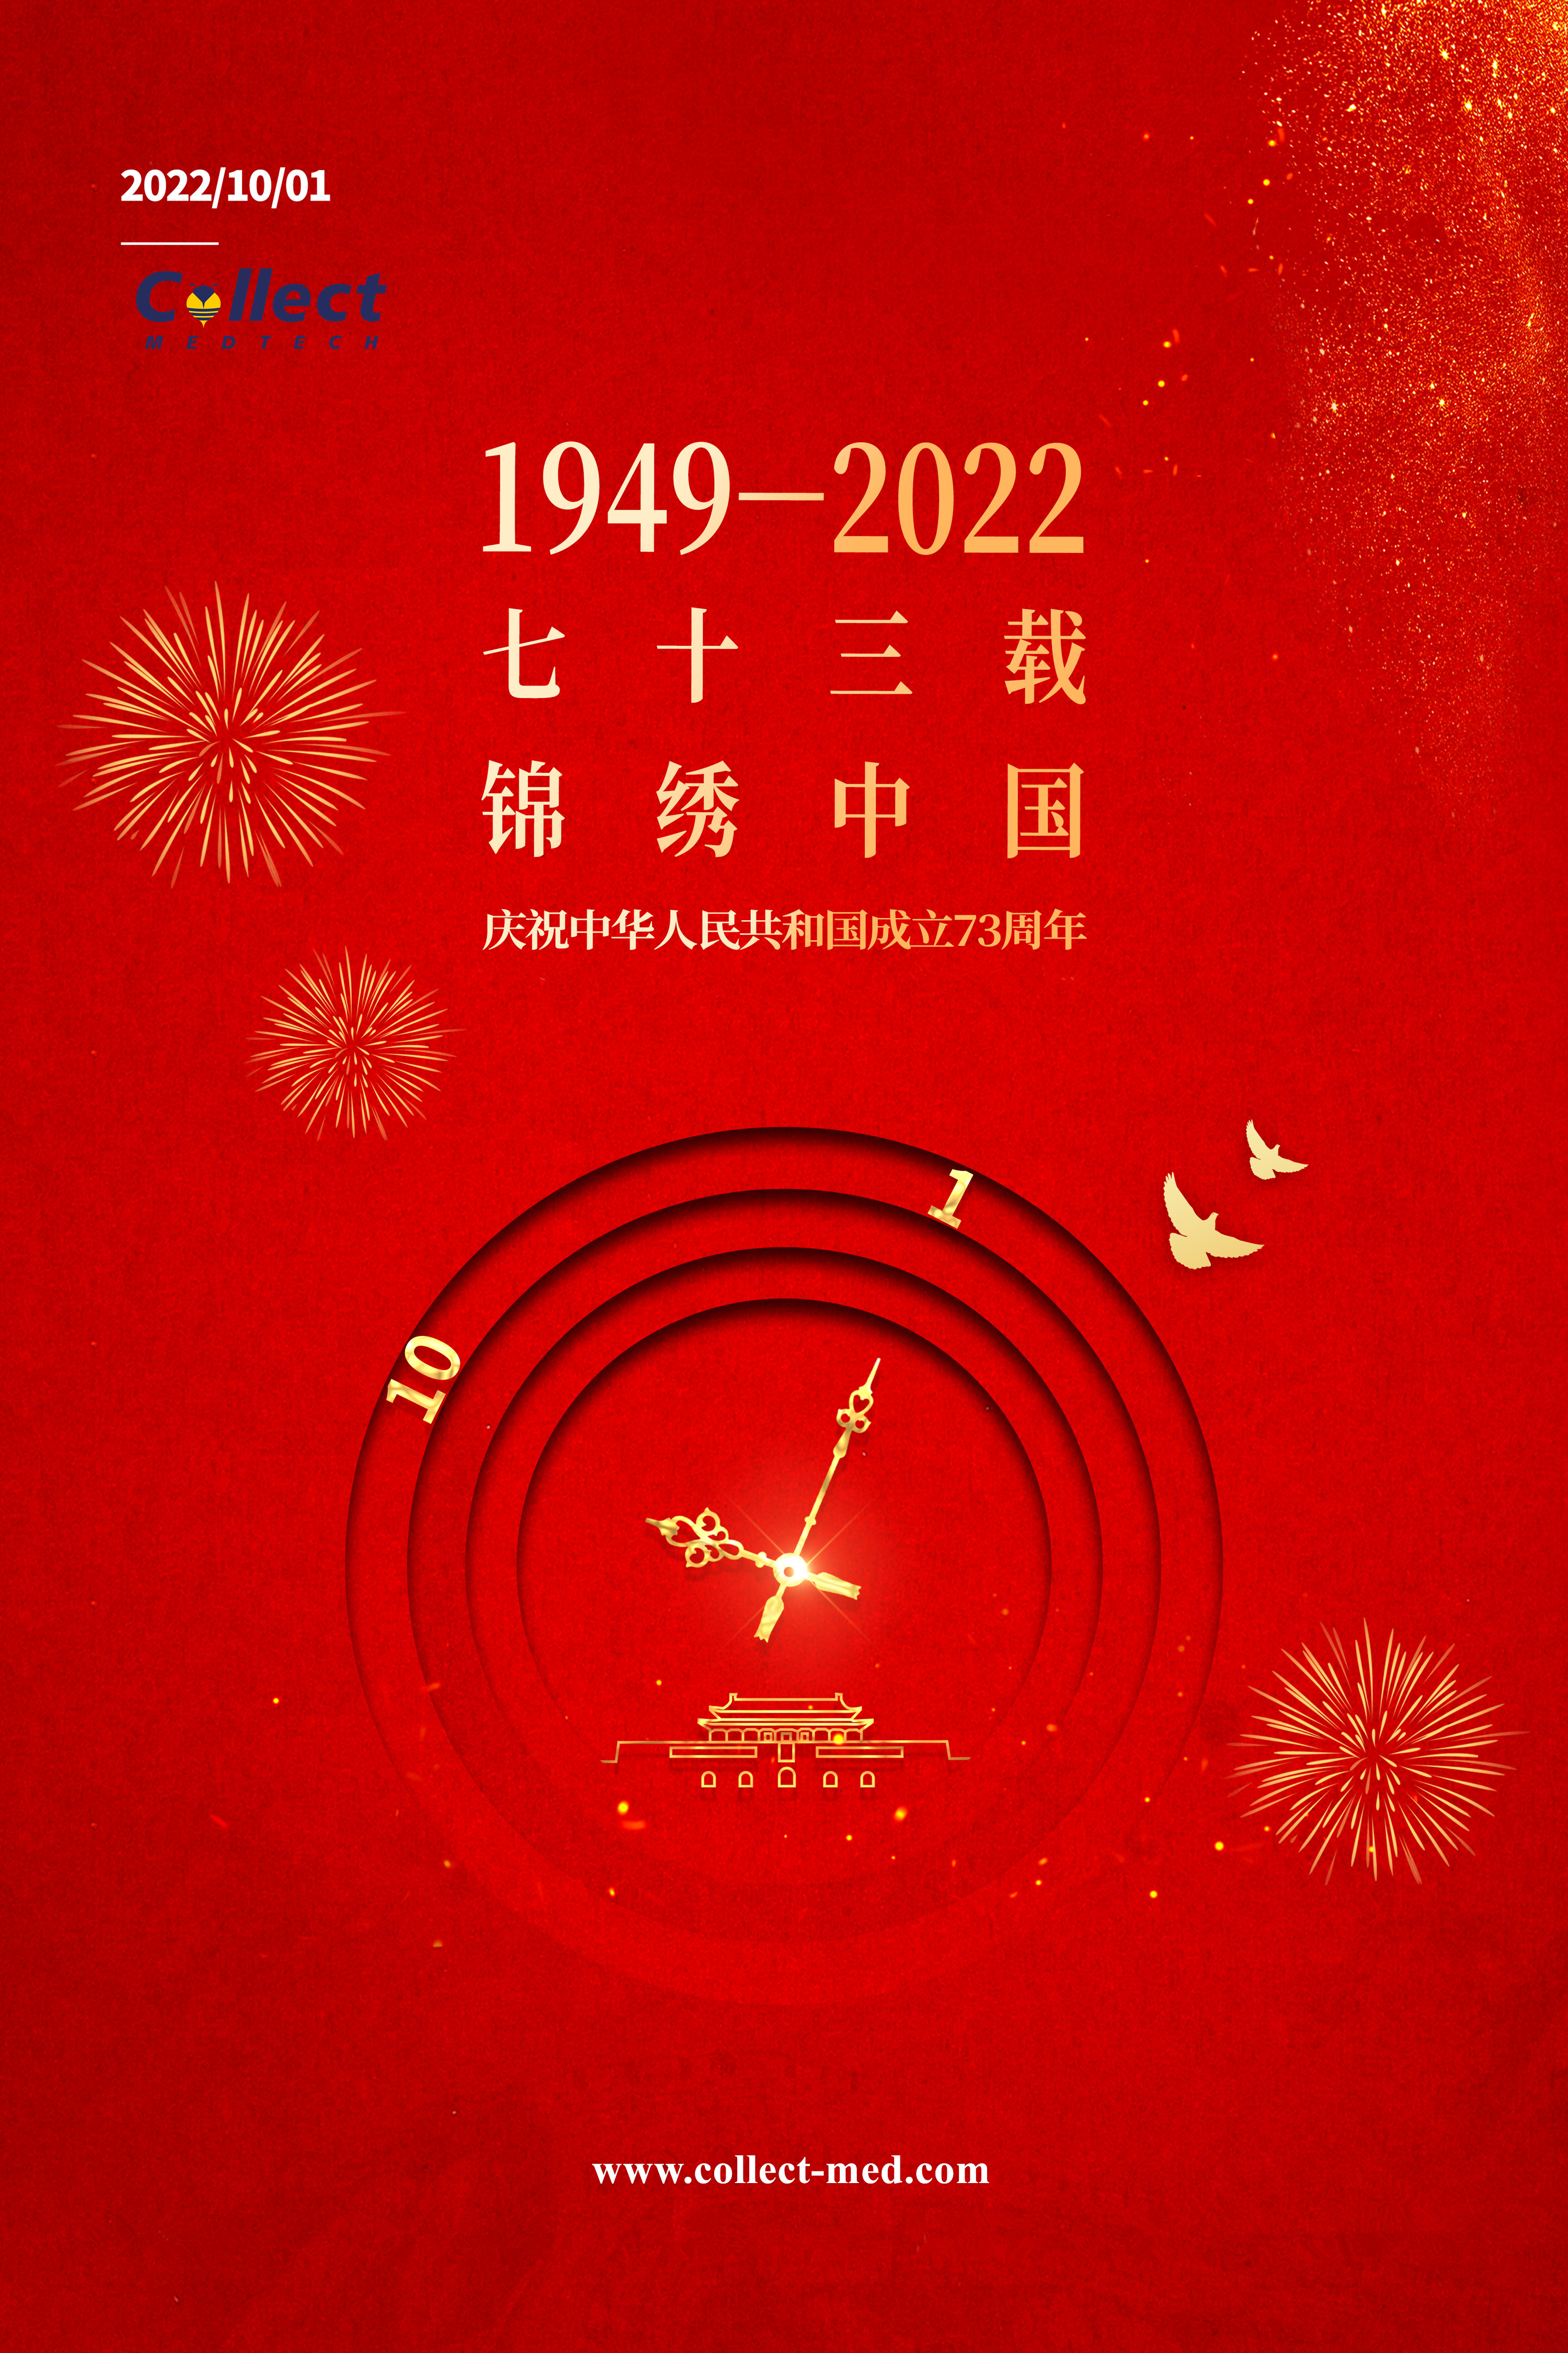 Happy Birthday, People’s Republic of China! And thanks for the 7-day holiday. (Oct. 1st-7th)